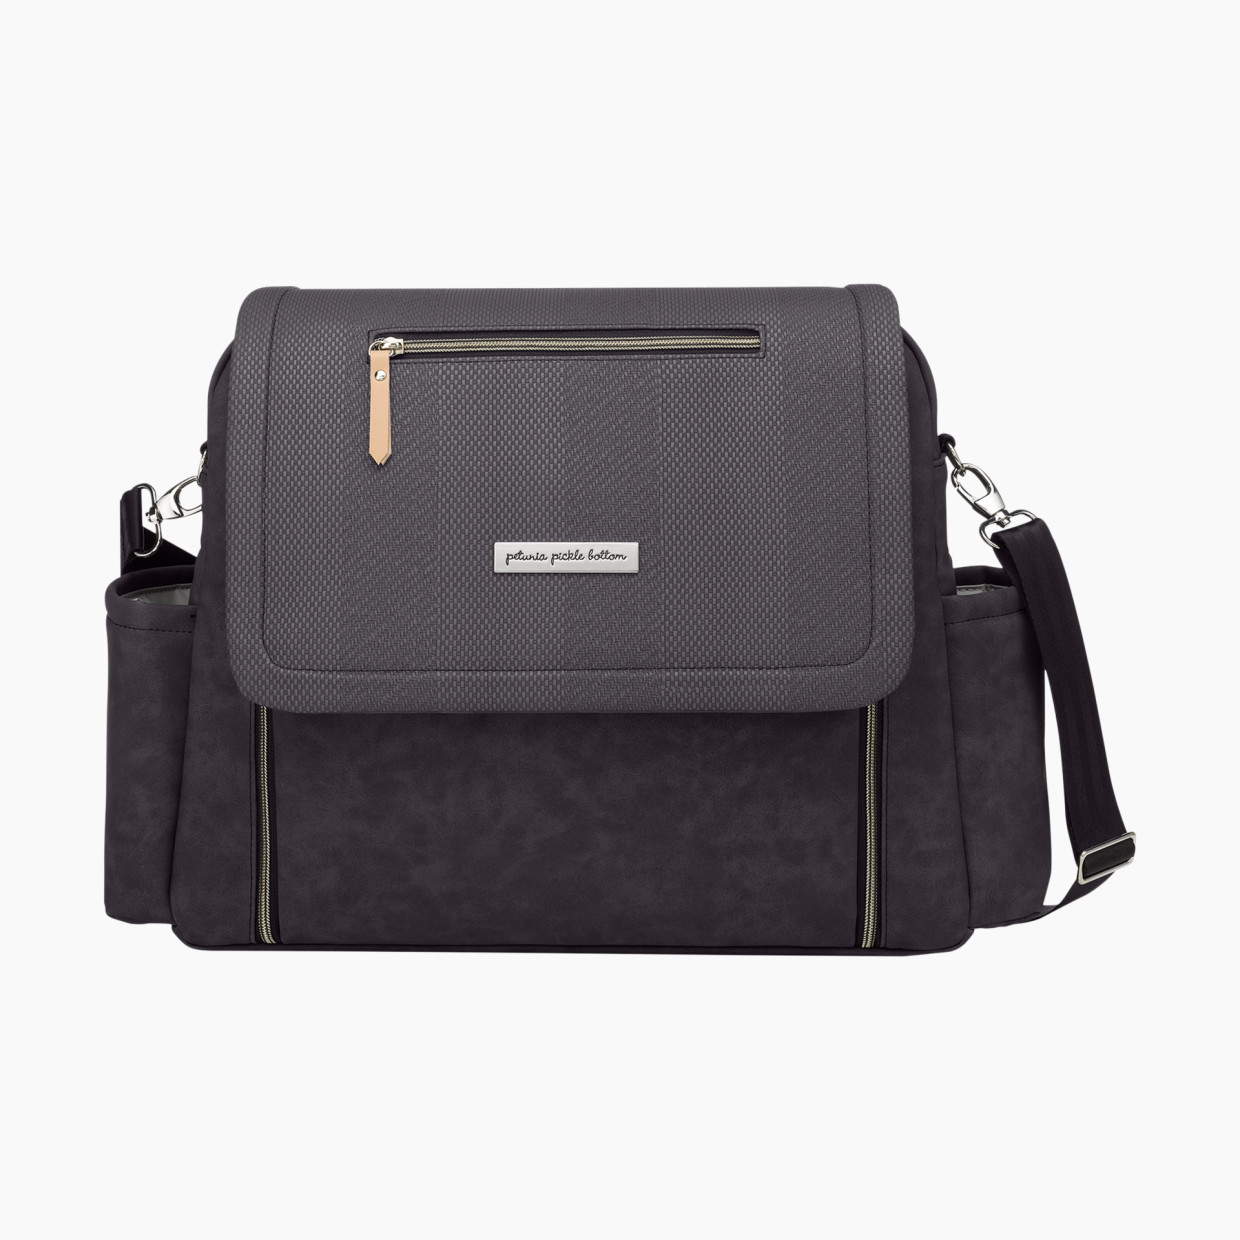 Petunia Pickle Bottom Boxy Backpack Deluxe - Carbon Cable Stitch.